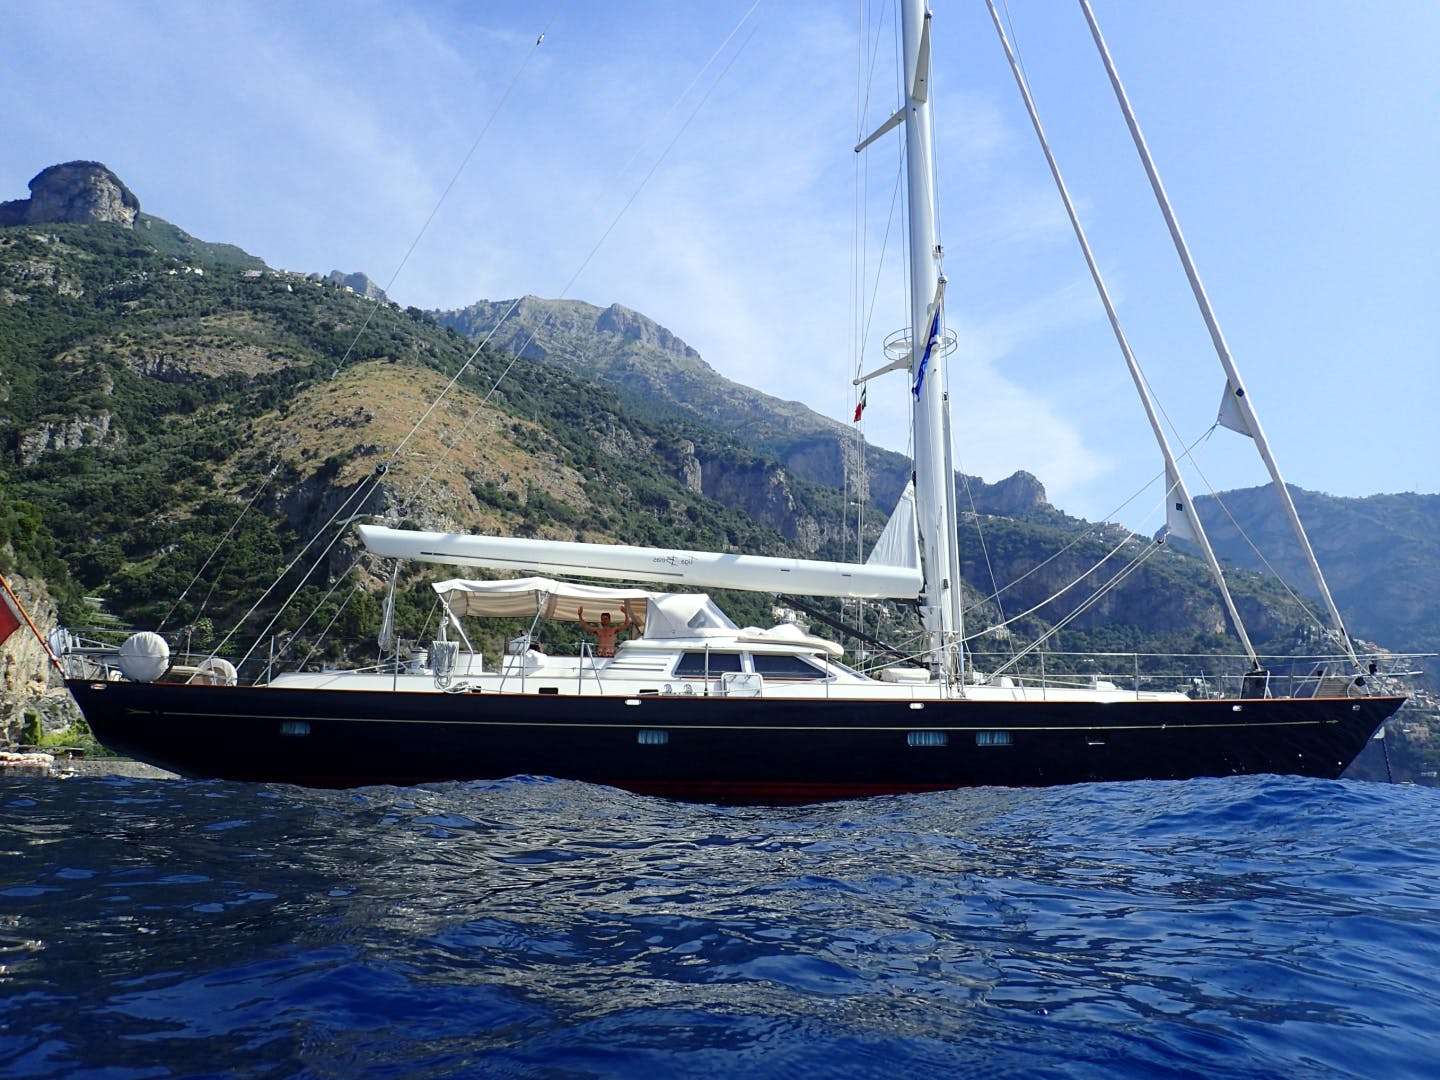 TIGA BELAS - Yacht Charter Leangbukta & Boat hire in North europe 1